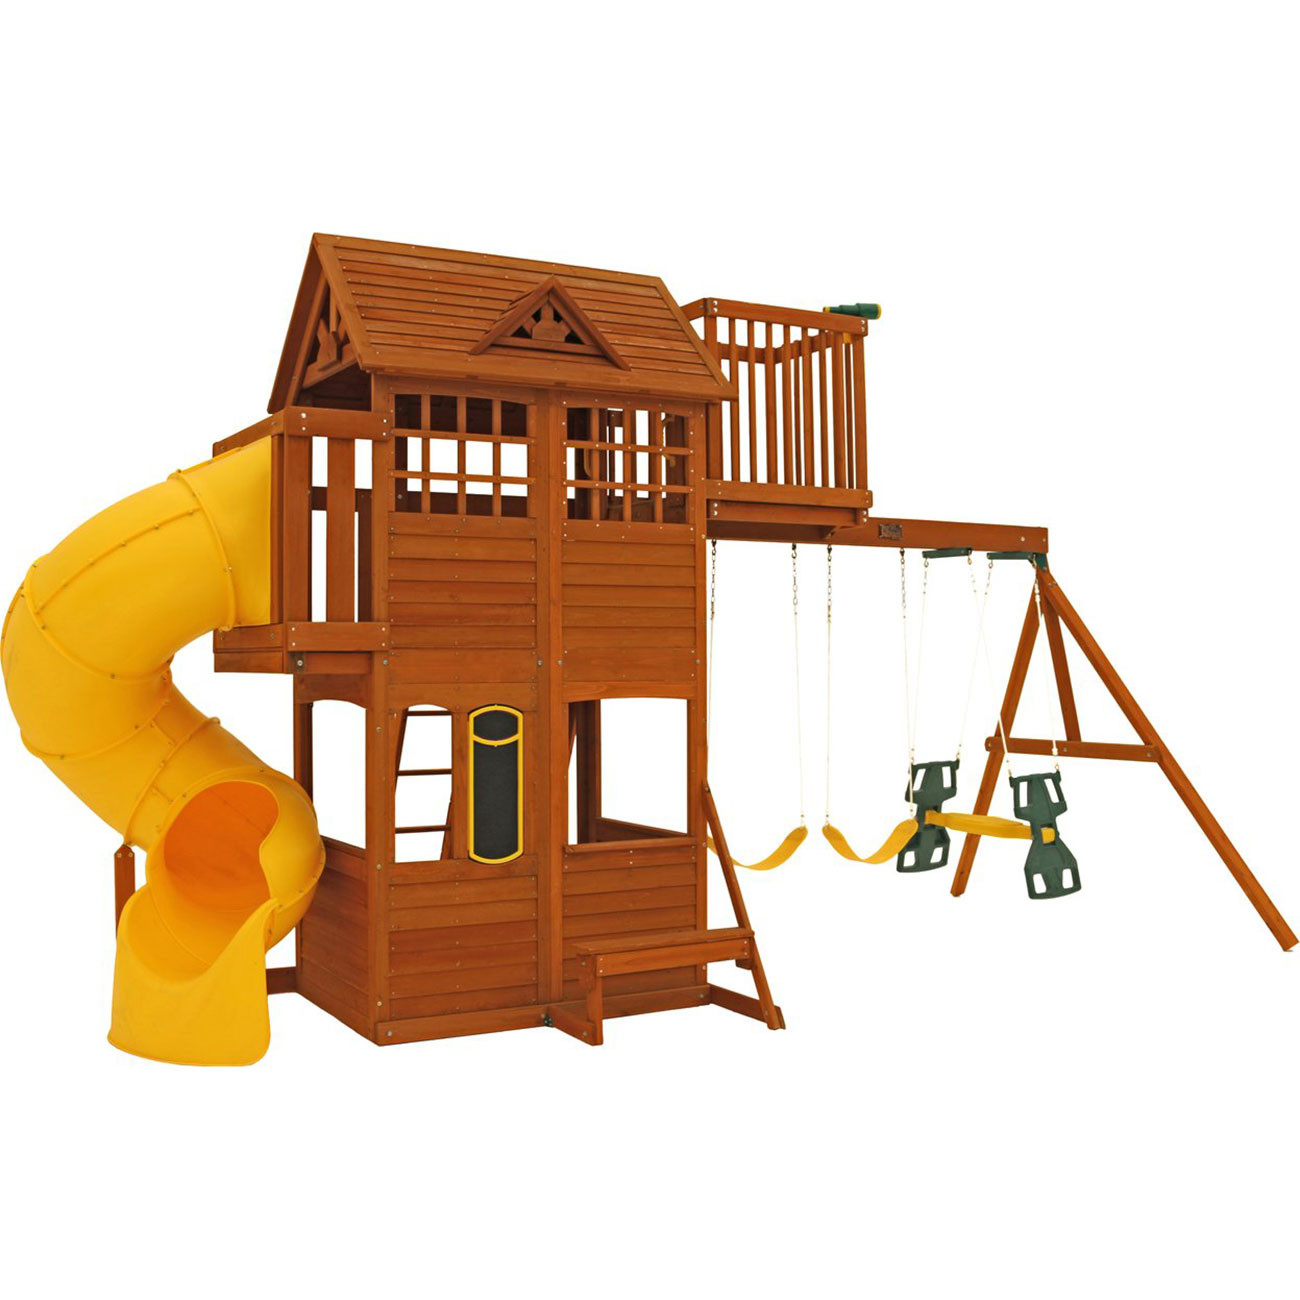 Kids Playhouse With Swing
 KidKraft Abbeydale Outdoor Childrens Playhouse Swing